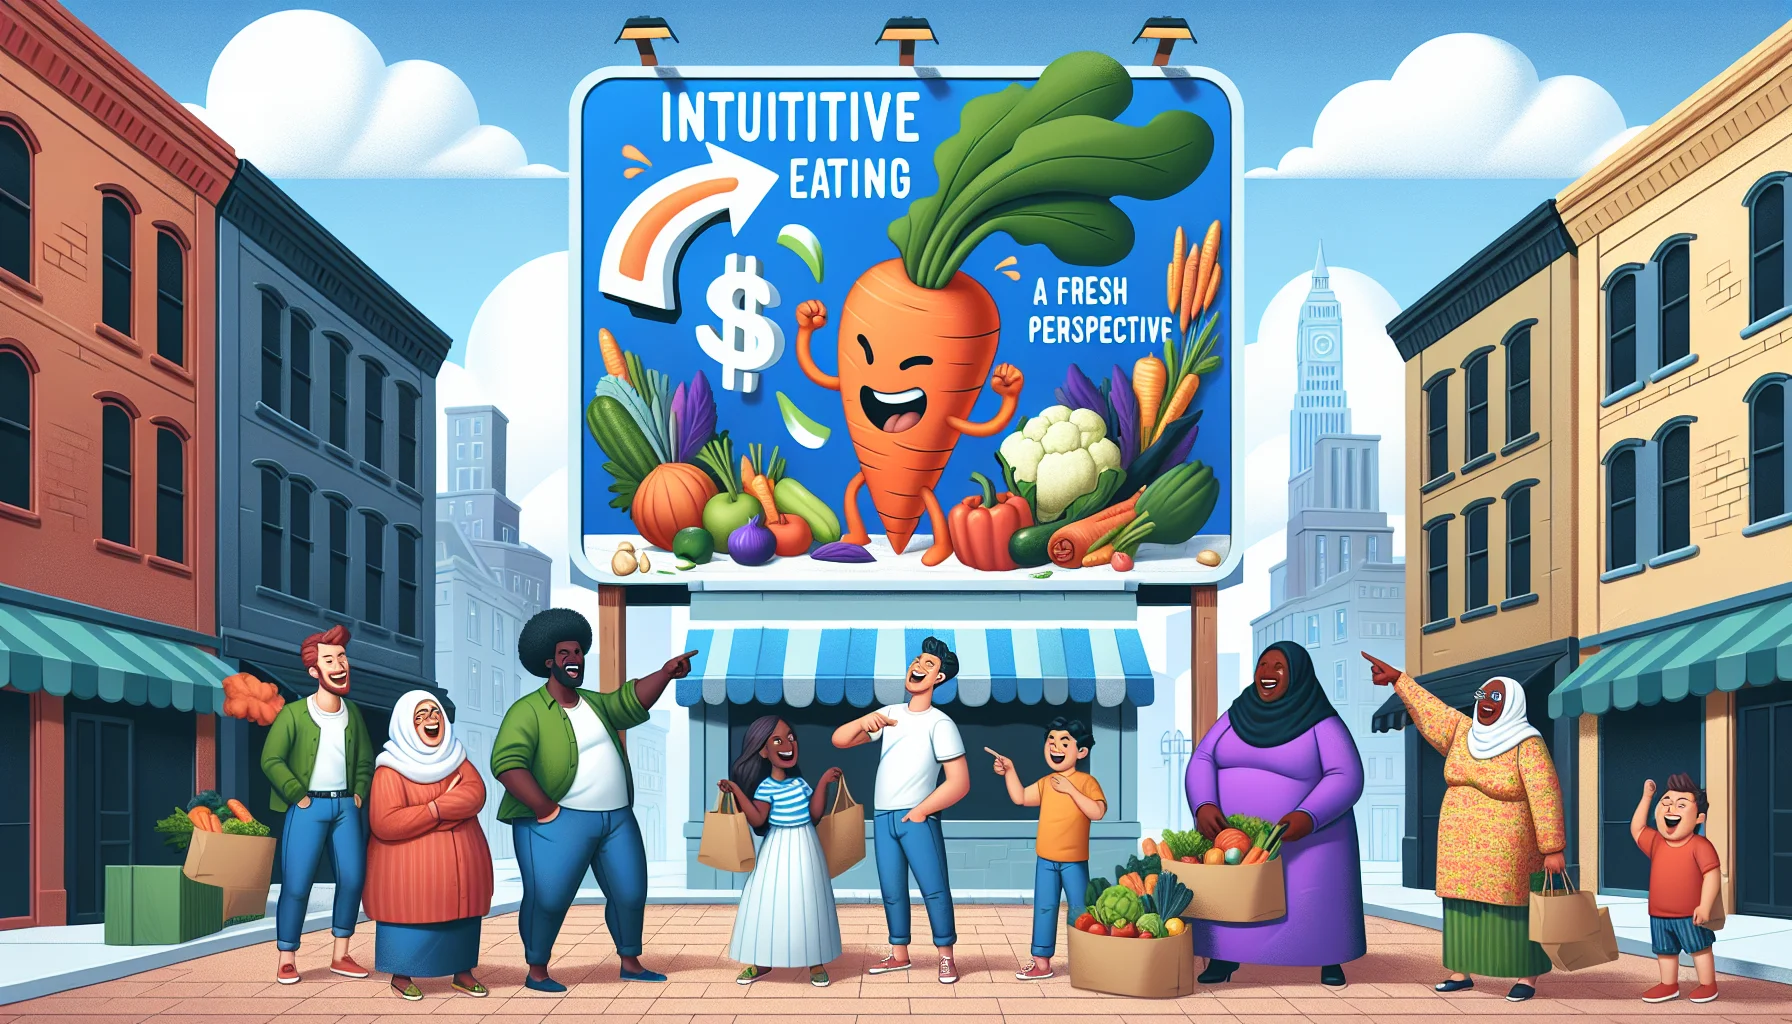 Create an illustrative and amusing scene showcasing 'Intuitive Eating: A Fresh Perspective'. In this lively town square, there is a large, colorful billboard with this phrase and the image of a giant carrot playfully wrestling with a dollar symbol. Around this square, there are diverse people Middle-Eastern woman, Caucasian man, South-Asian boy, and Black elderly woman - all laughing and pointing at this billboard, with their bags full of fresh vegetables and fruits. They are wearing casual everyday clothes and their actions suggest that they're enjoying their time shopping for healthy food while saving money.